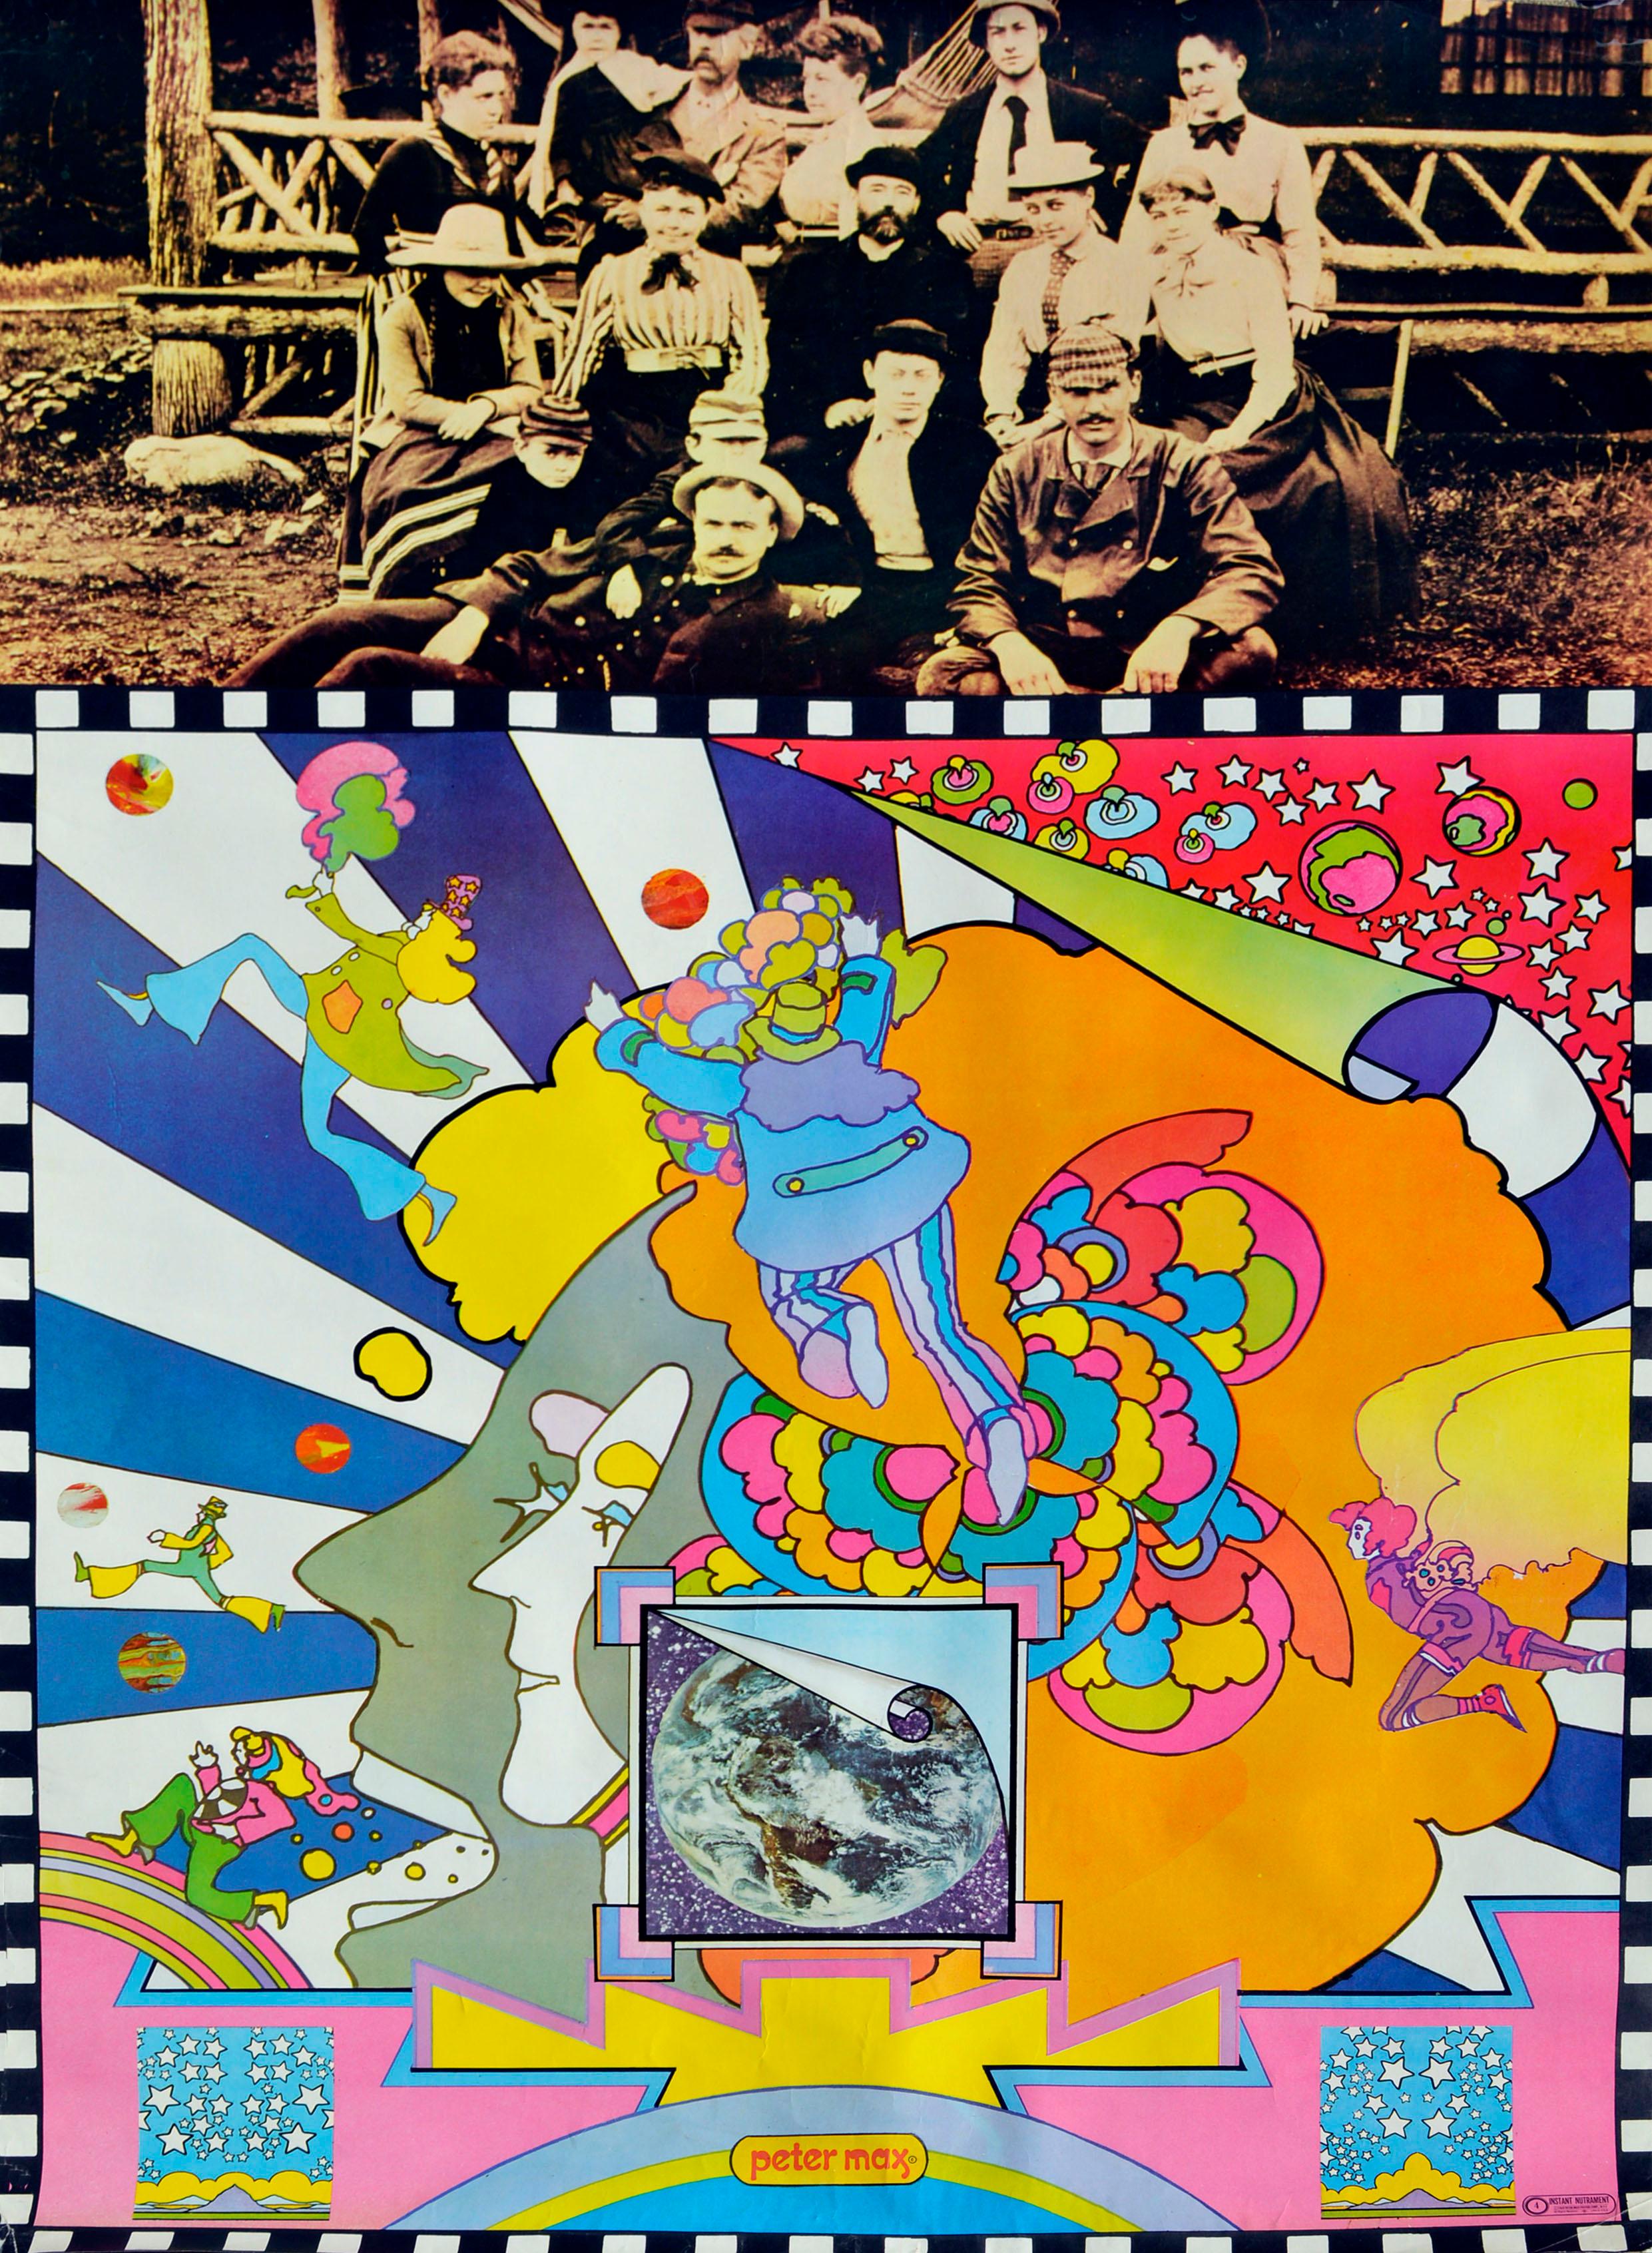 Instant Nutriment #4, 1969 - Psychedelic Print